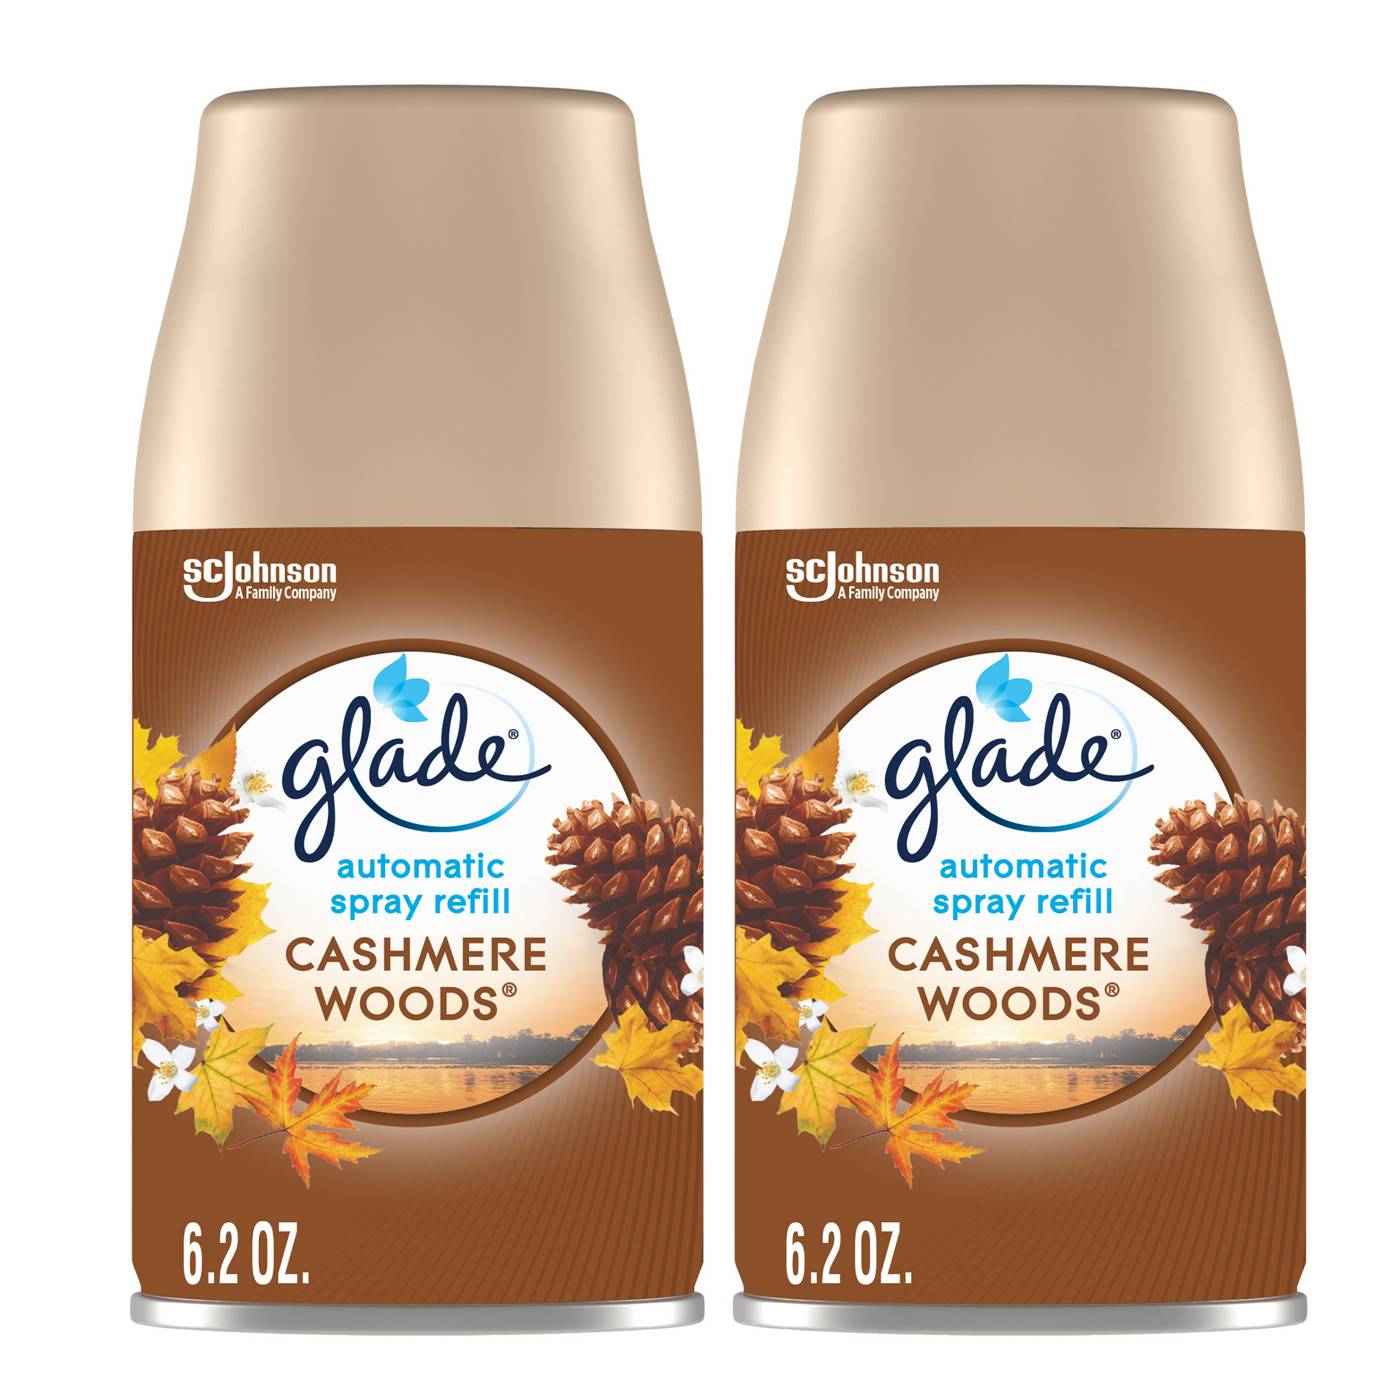 Glade Automatic Spray Refills, Value Pack - Cashmere Woods; image 1 of 3